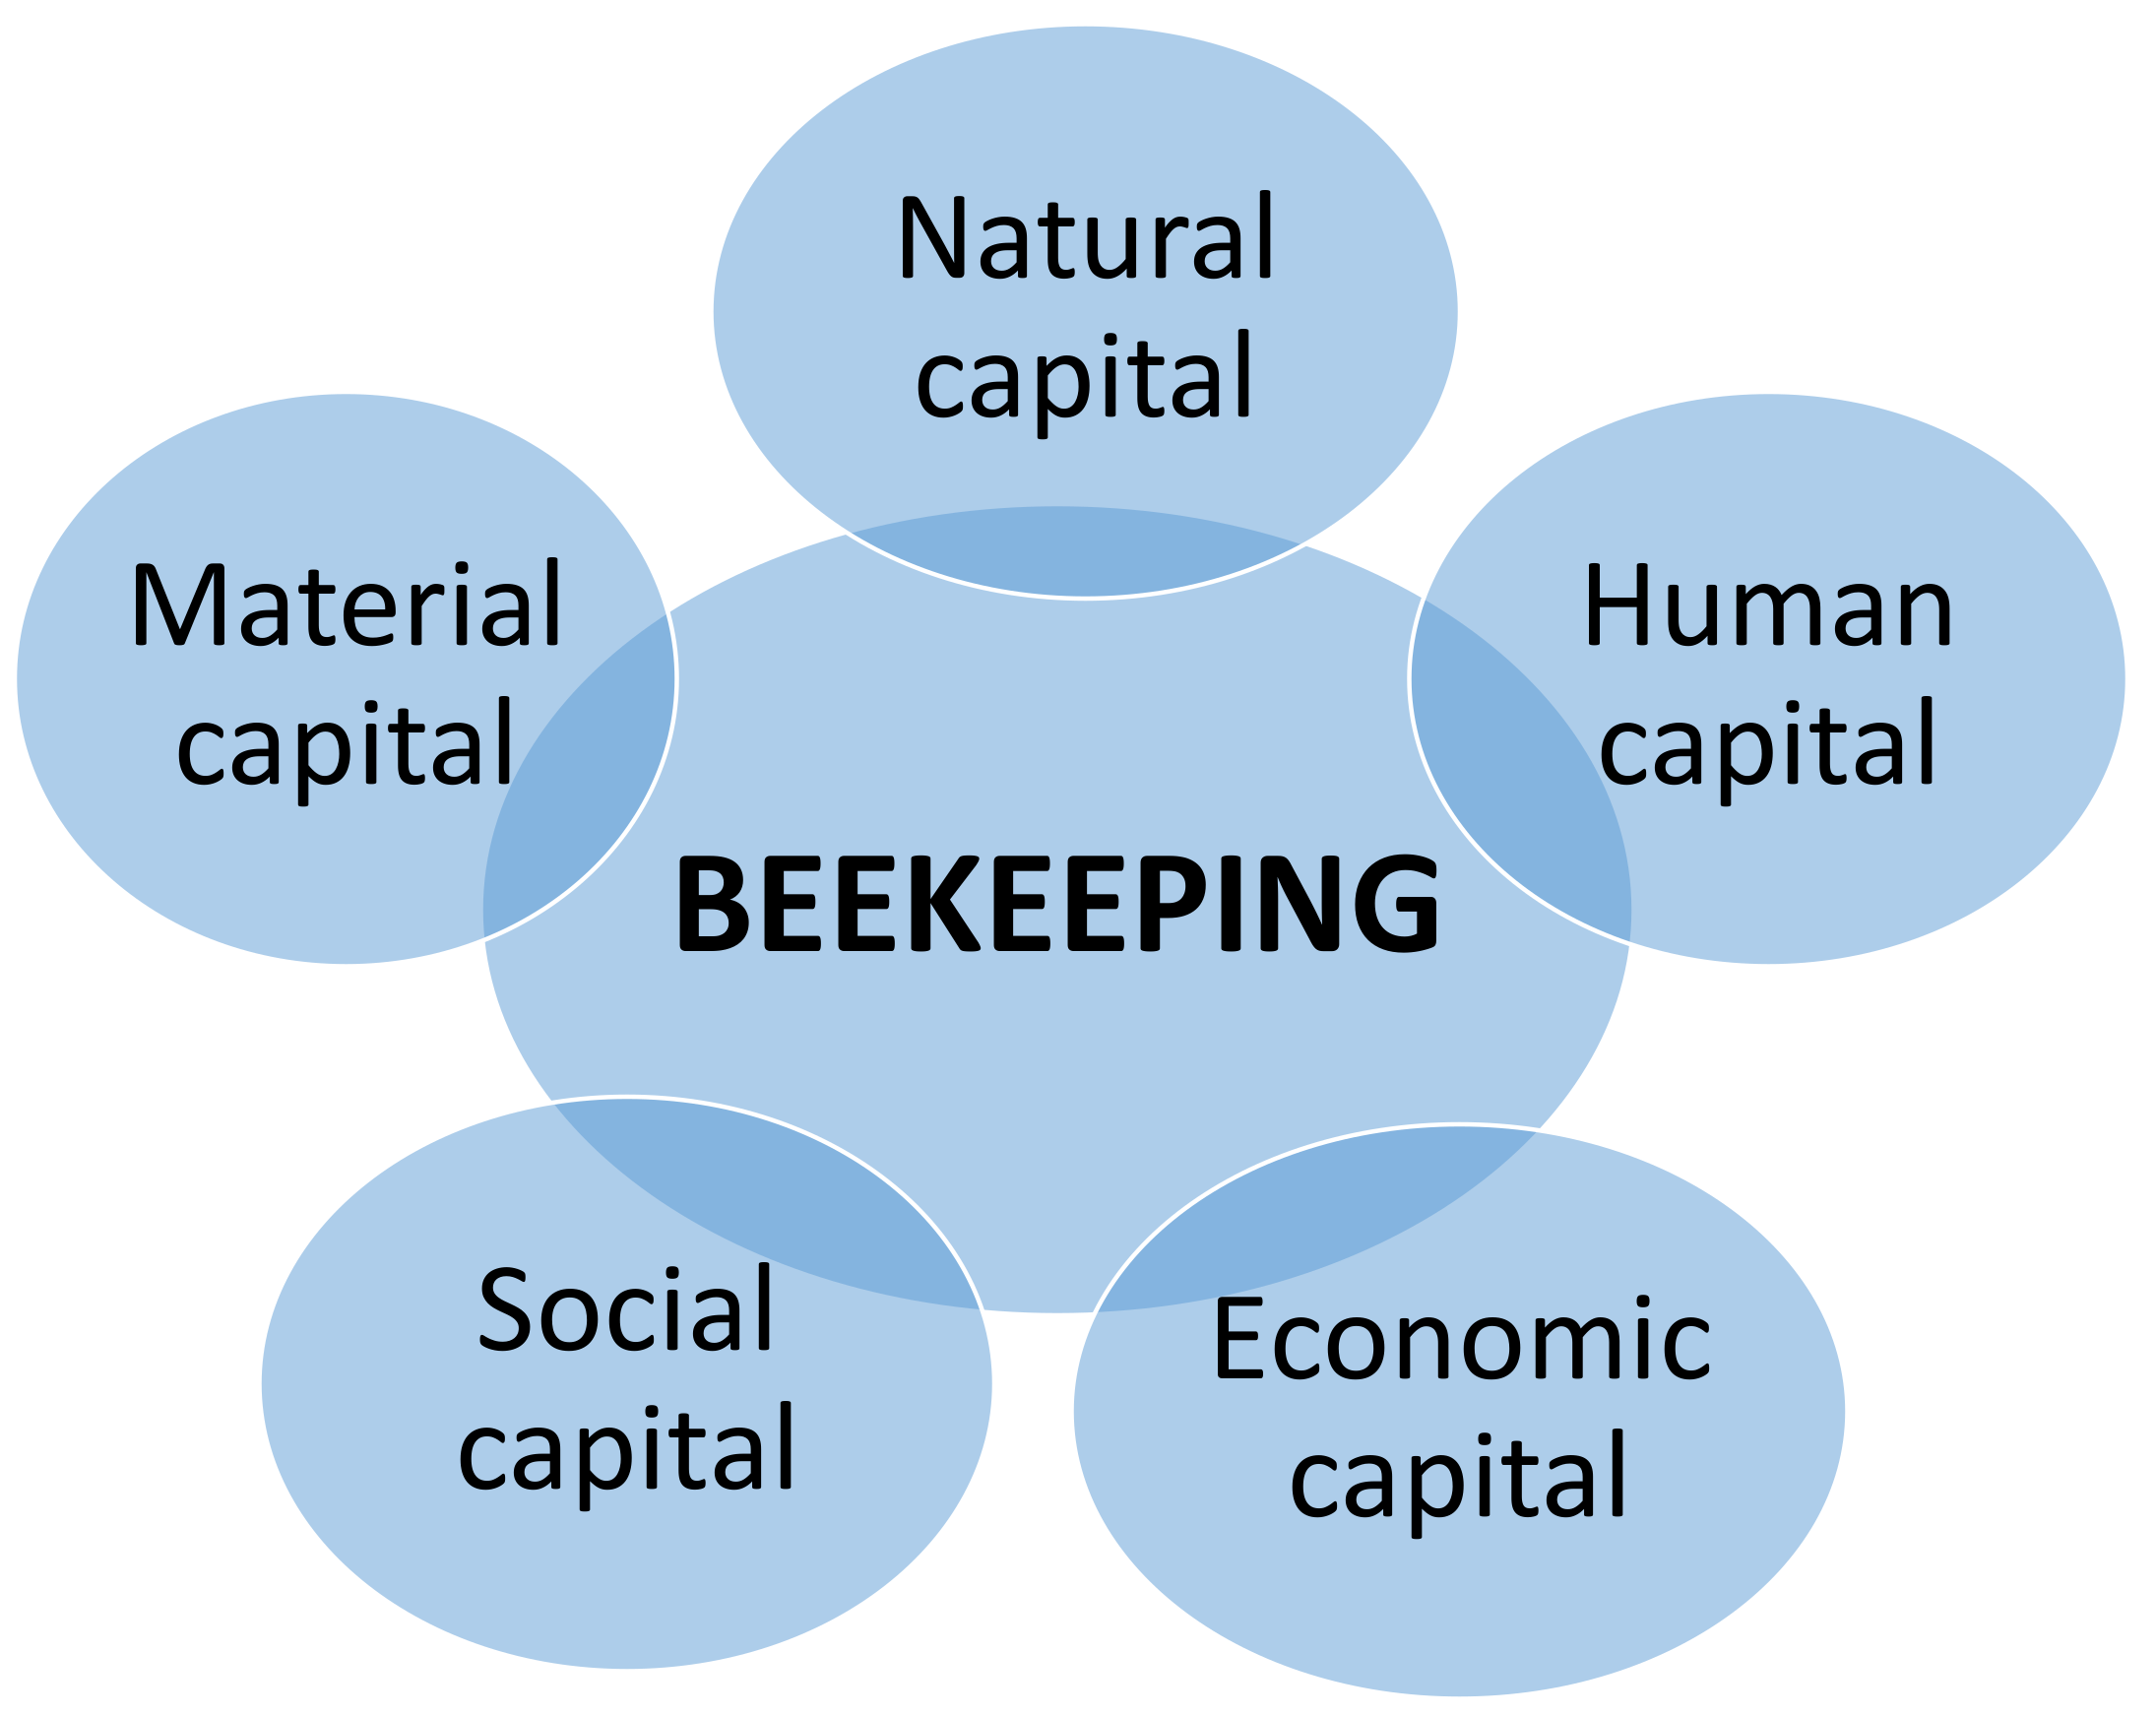 Full article: Factors influencing beekeepers income, productivity and  welfare in developing countries: a scoping review